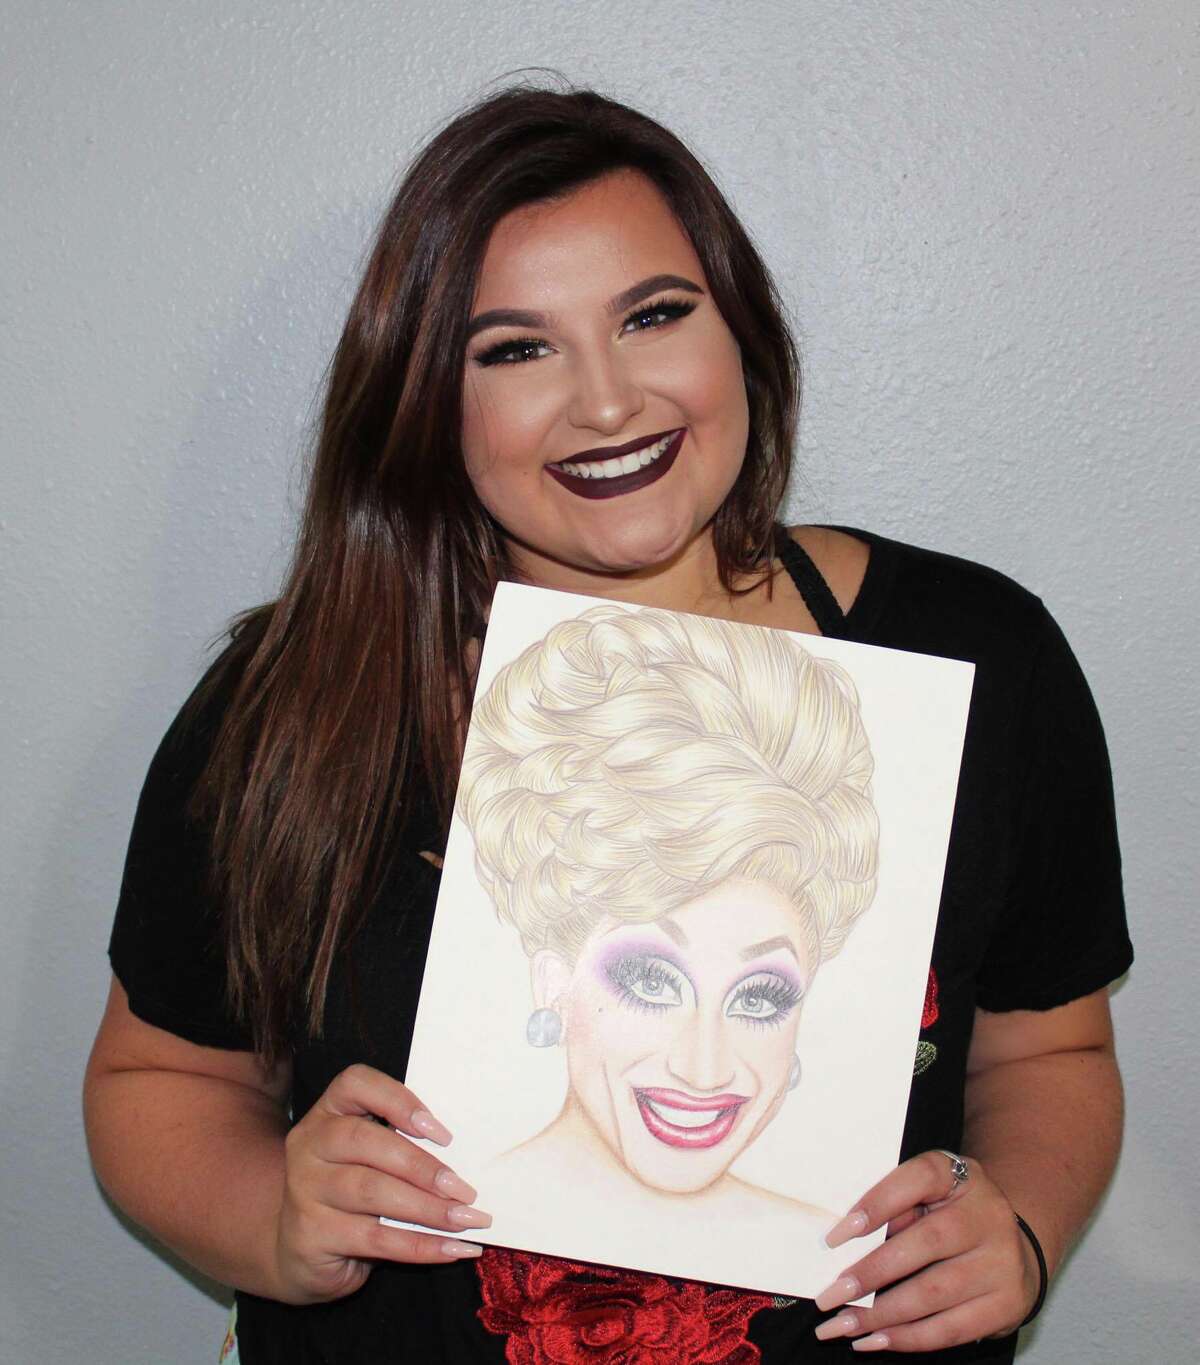 Baileigh Wisocki sold drawings of drag superstars, including Bianca Del Rio, to help with Hurricane Harvey relief.